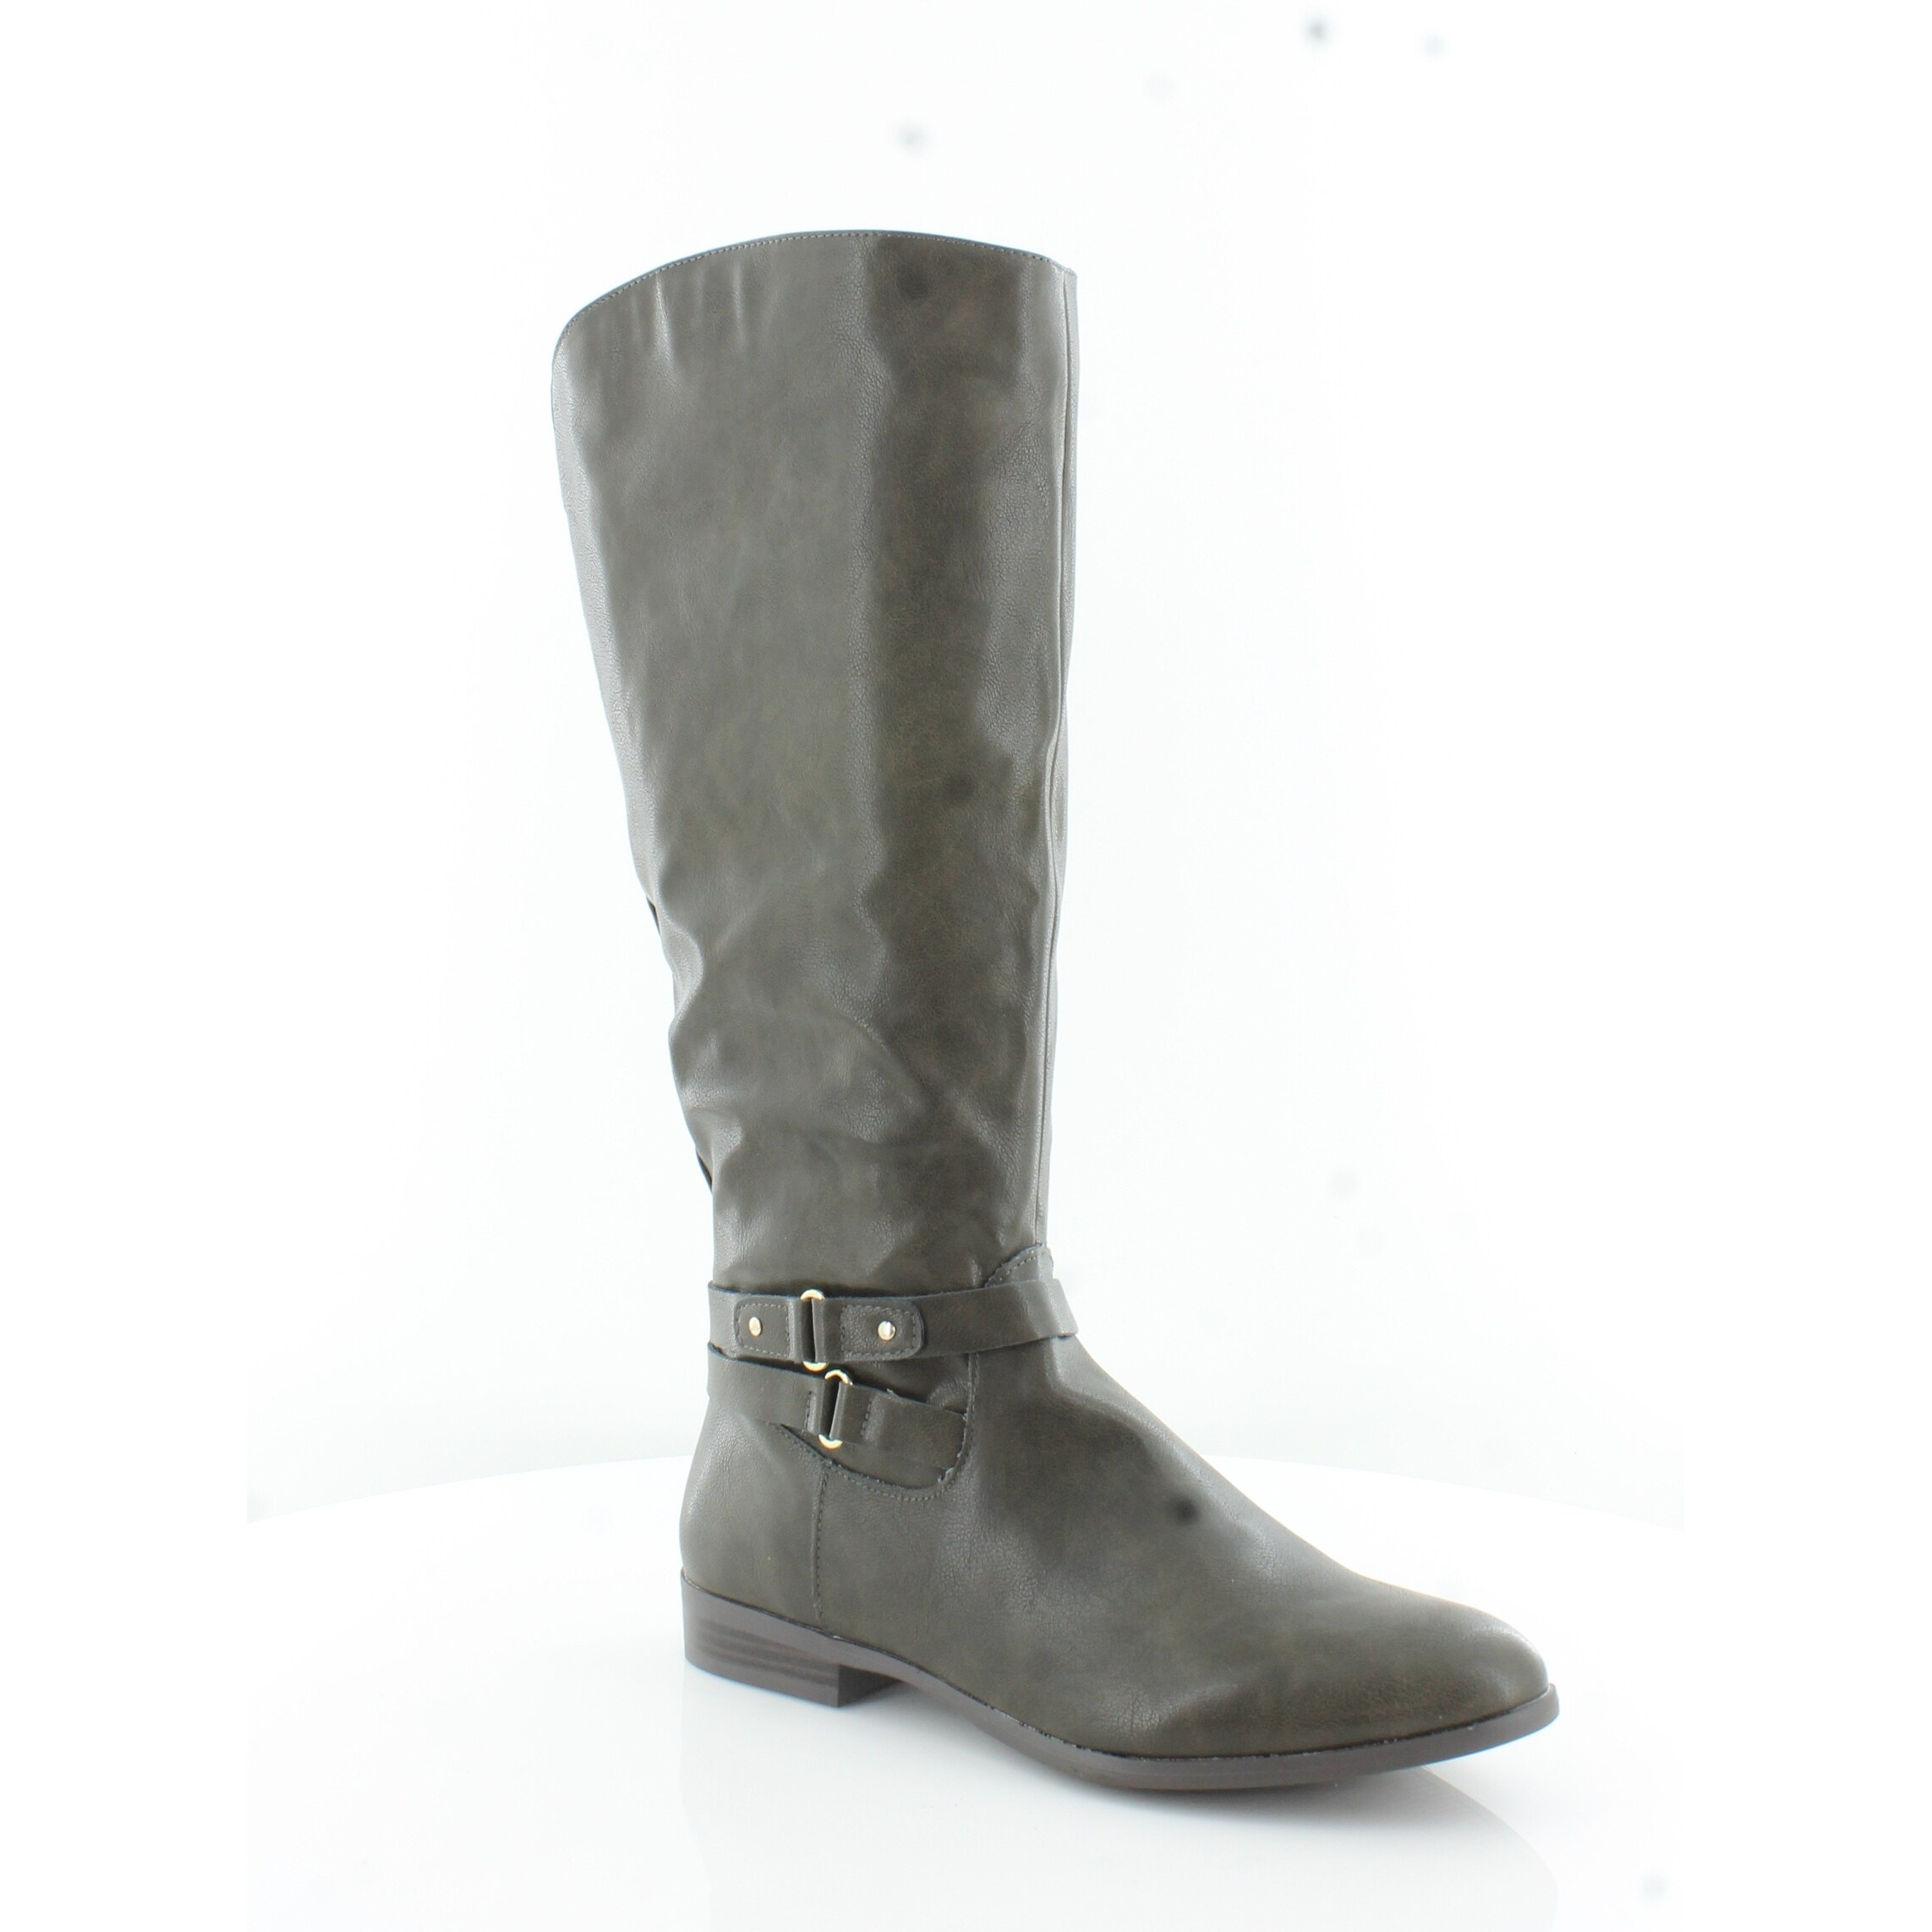 style & co kindell riding boots